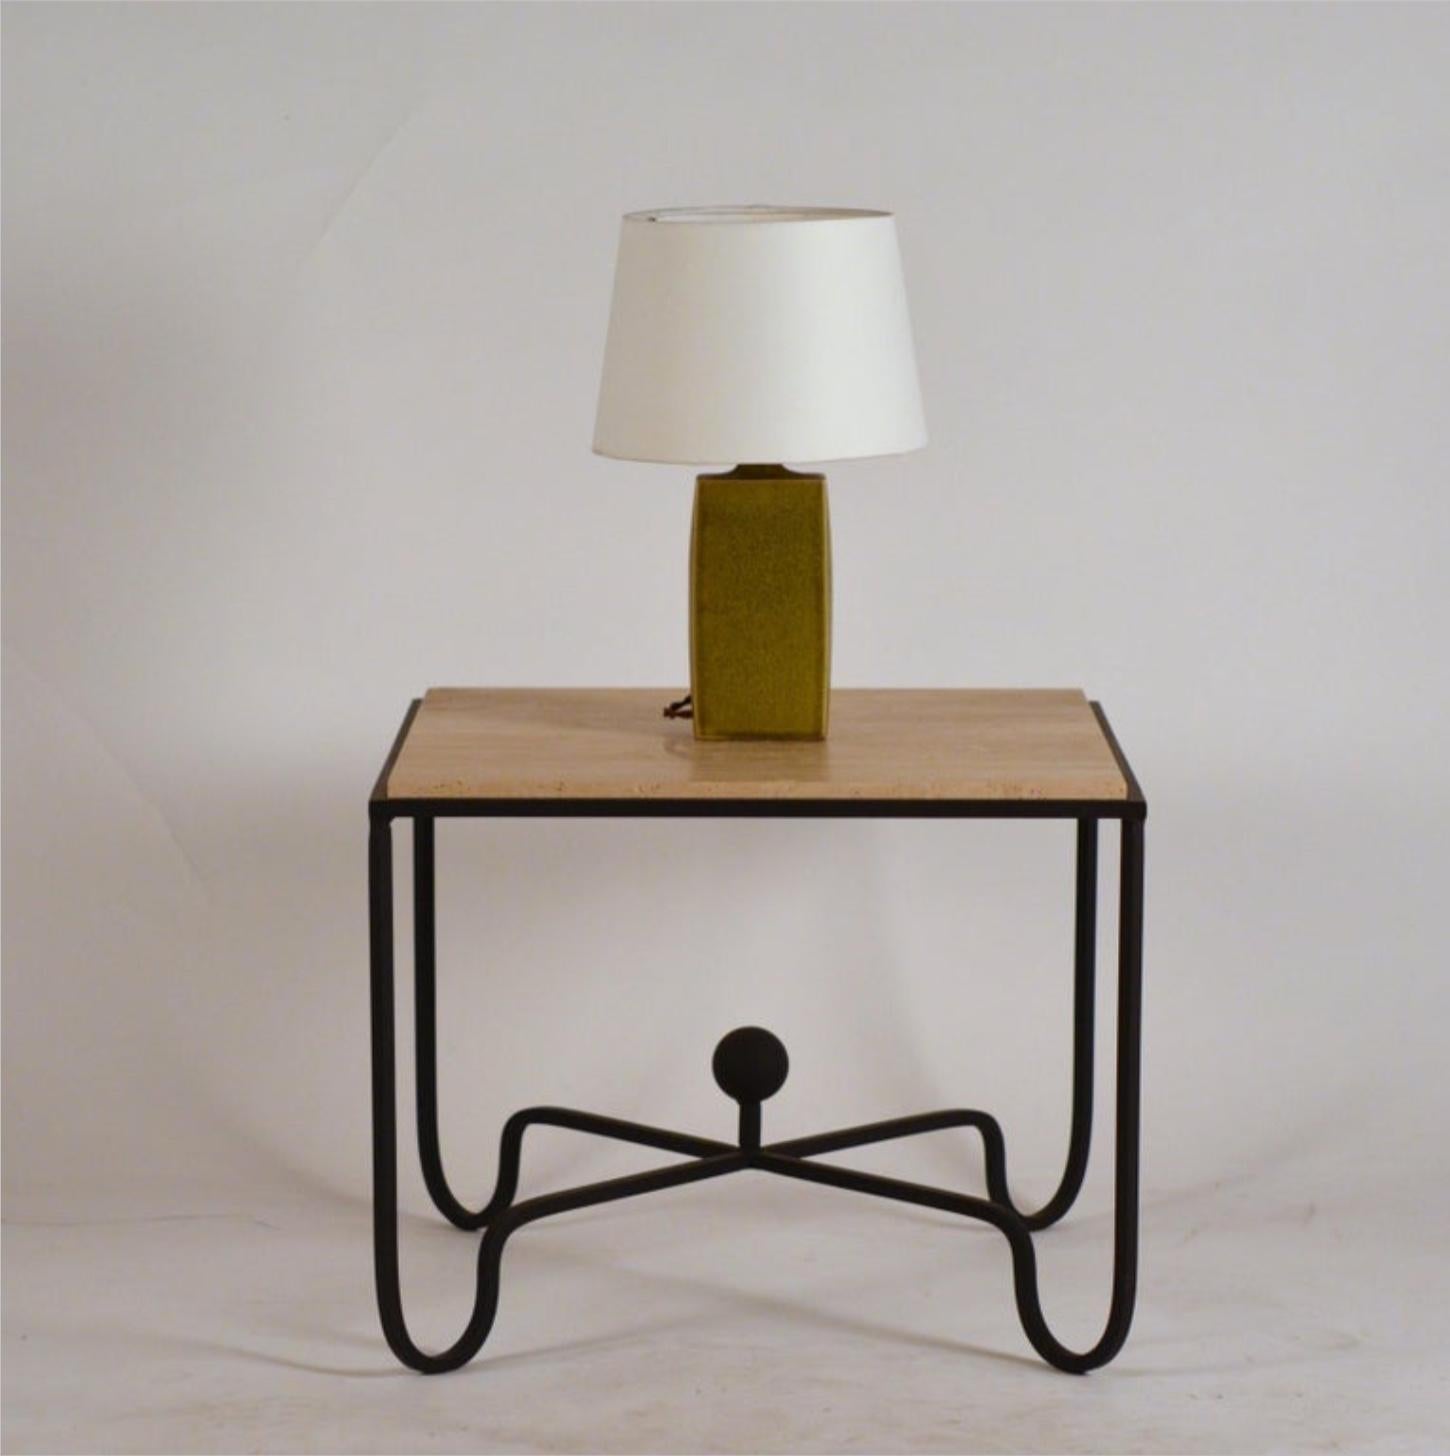 Scandinavian Modern Chic Glazed Ceramic Lamp with Parchment Shade For Sale